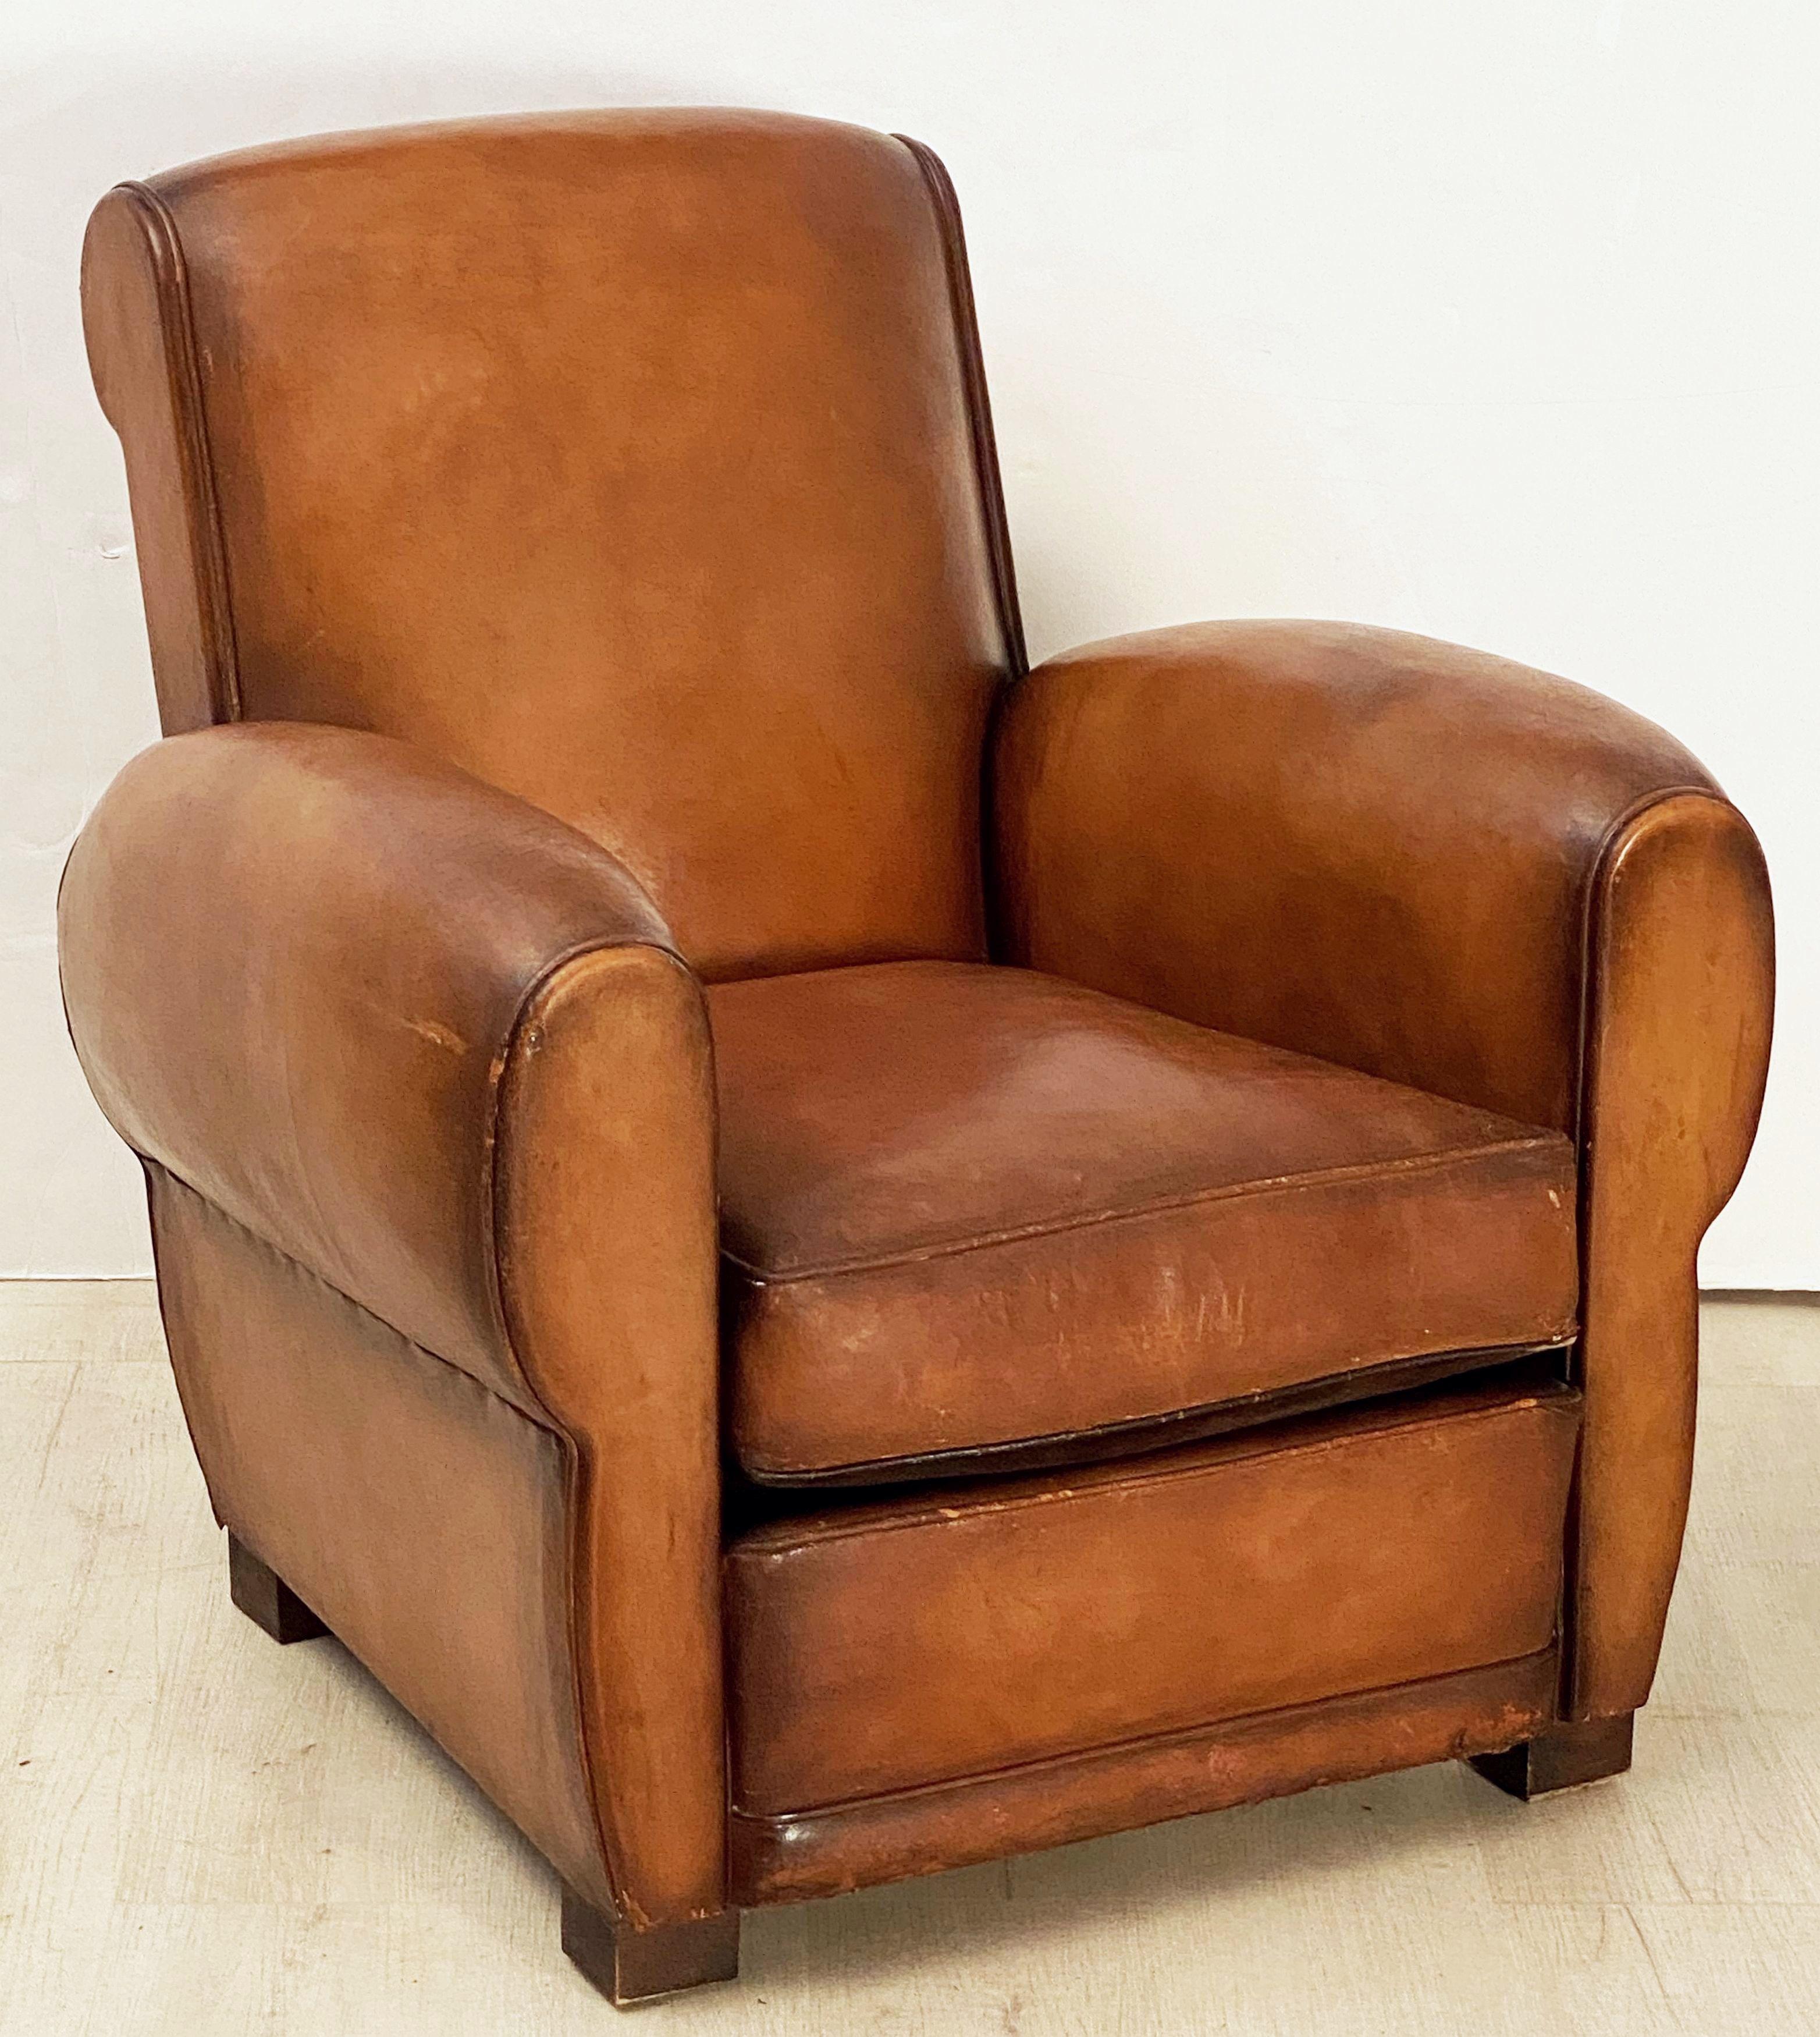 Vintage French Leather Club or Lounge Chair from the Art Deco Era 5